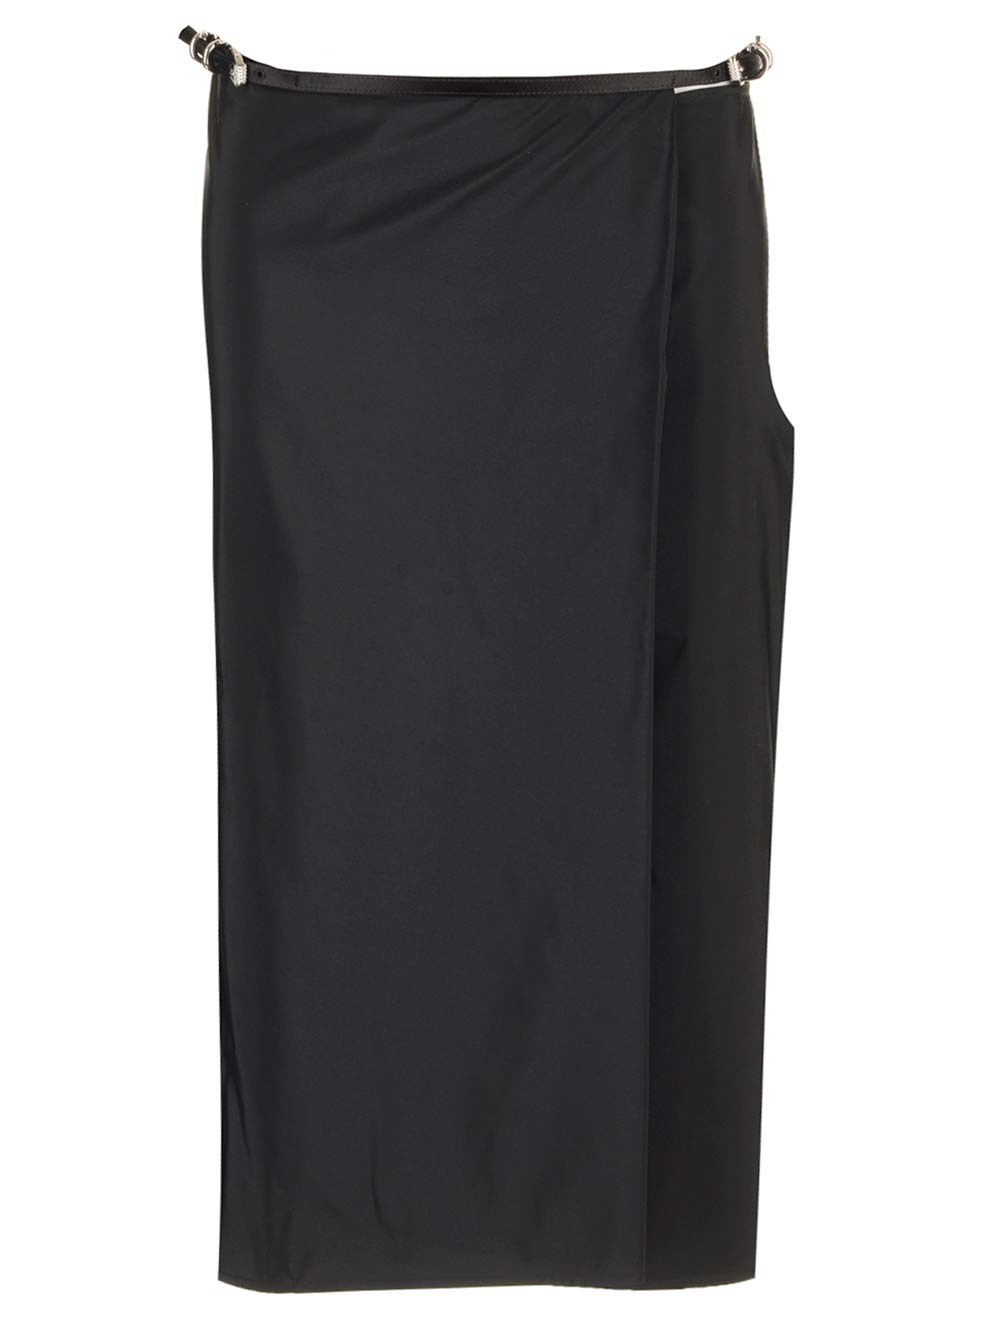 GIVENCHY VOYOU WRAP SKIRT